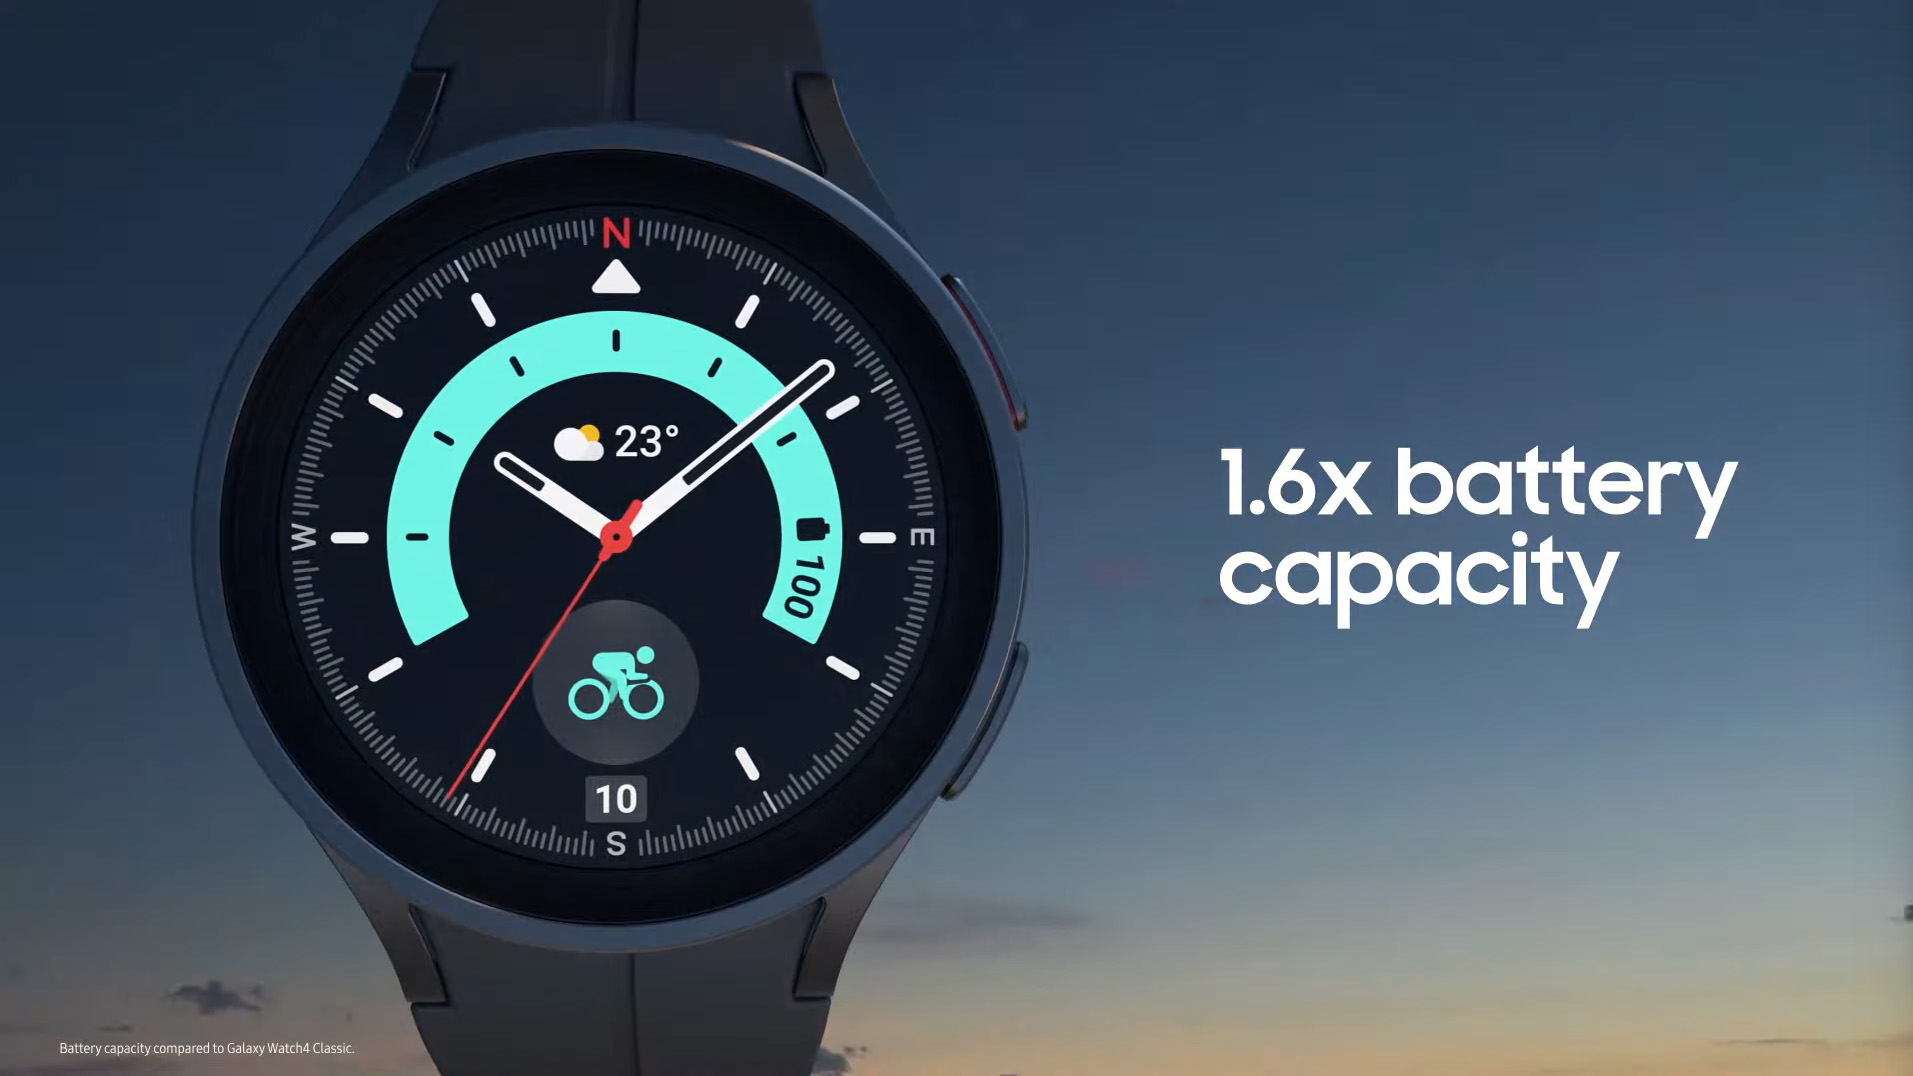 Galaxy Watch 5 Pro at Unpacked August 2022